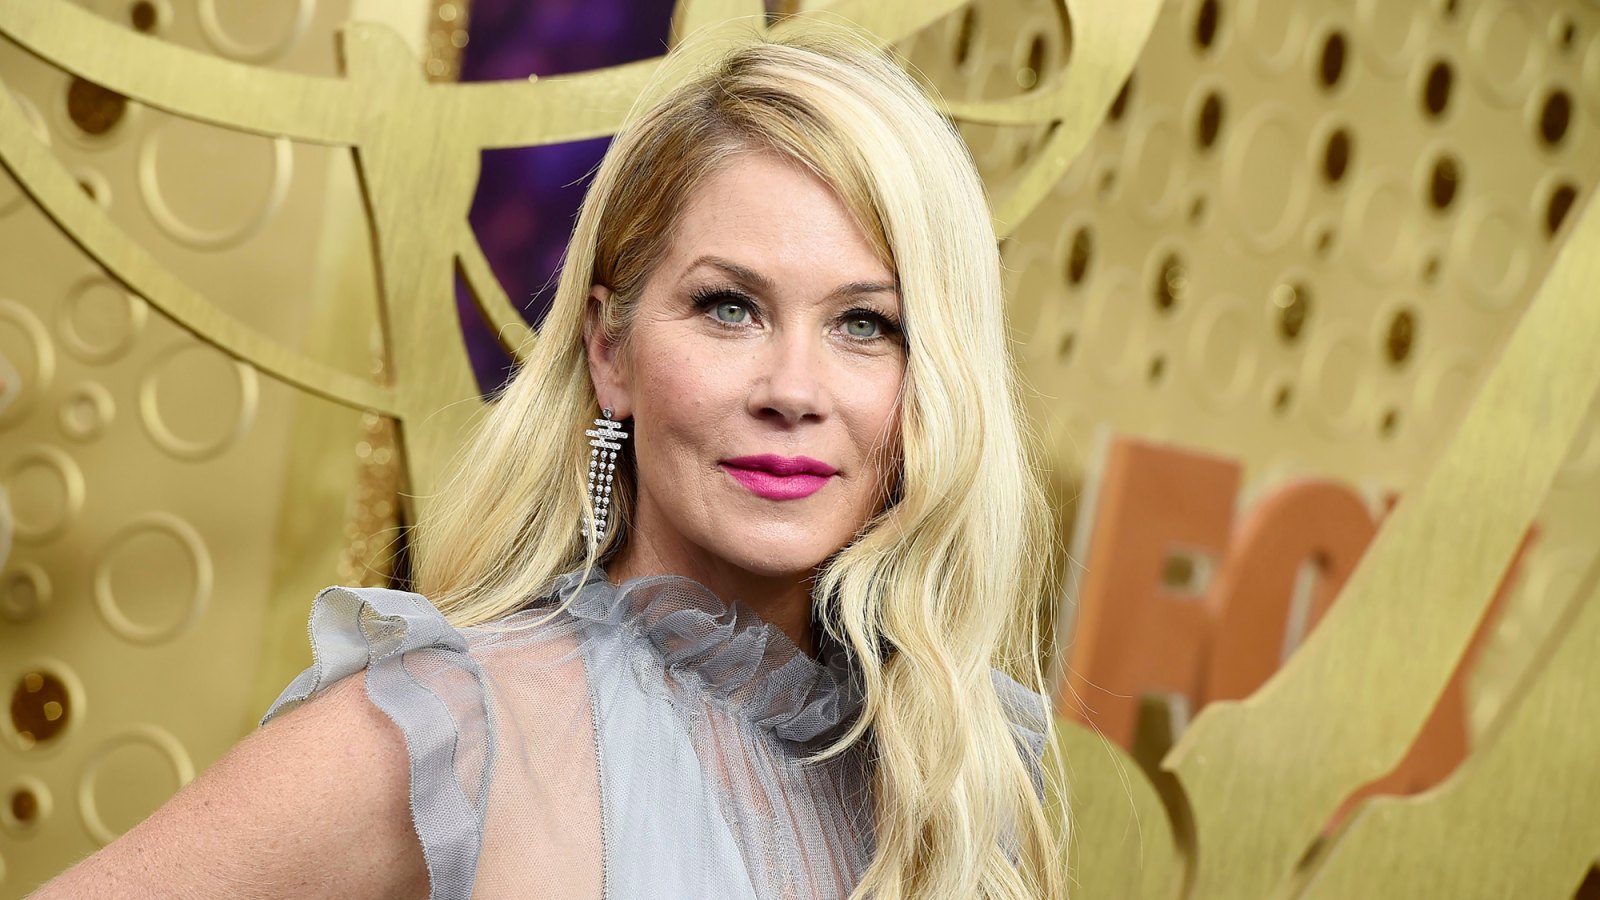 Christina Applegate Celebrates 50th Birthday After MS Diagnosis: ‘May We Find Strength’